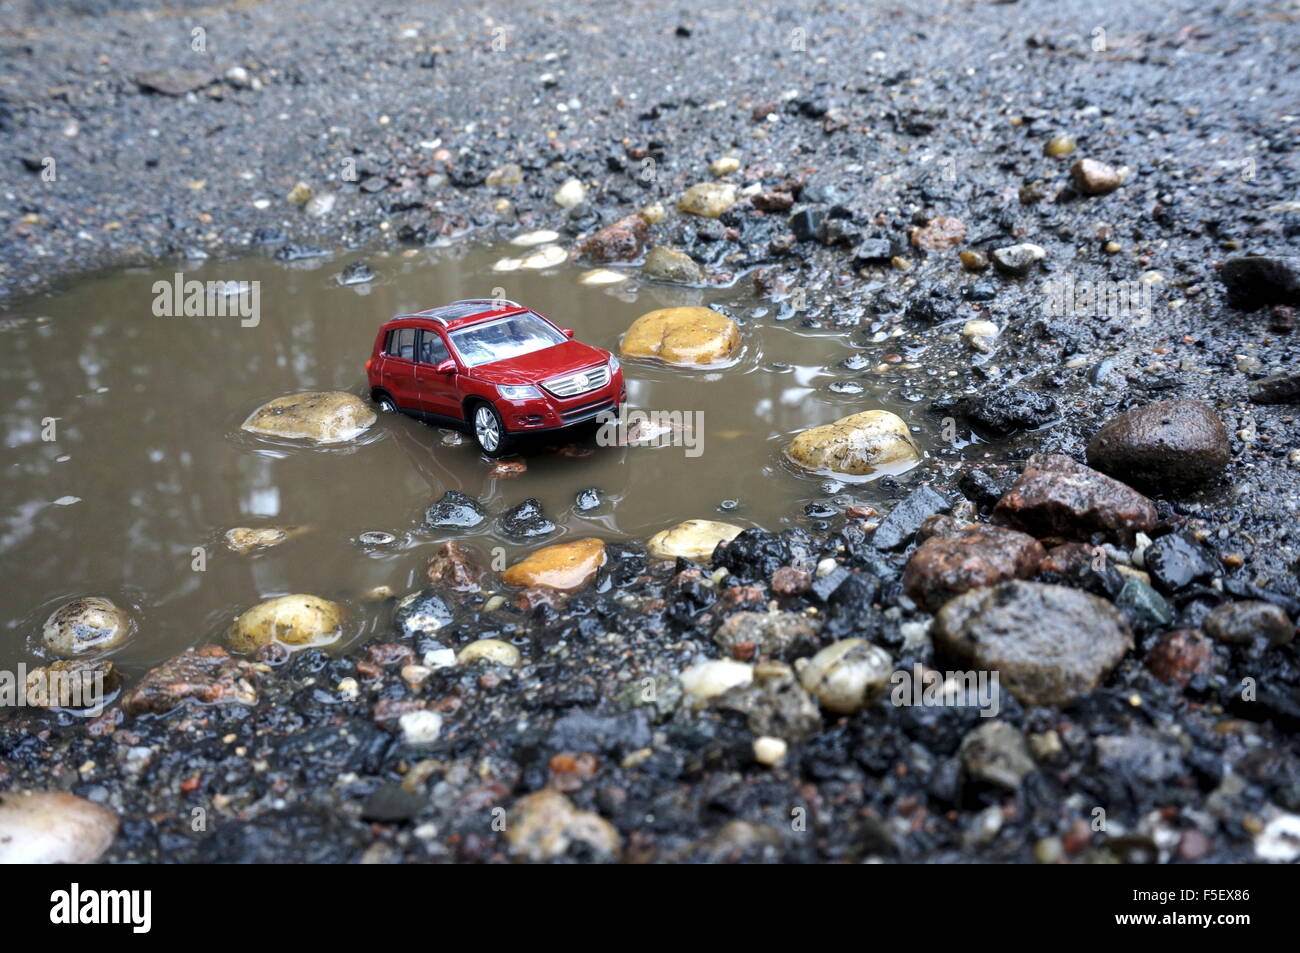 ILLUSTRATION - A Volkswagen car model 'VW Tiguan' in a puddle. The photo was taken on 15 October 2015. Photo: S. Steinach - NO WIRE SERVICE - Stock Photo